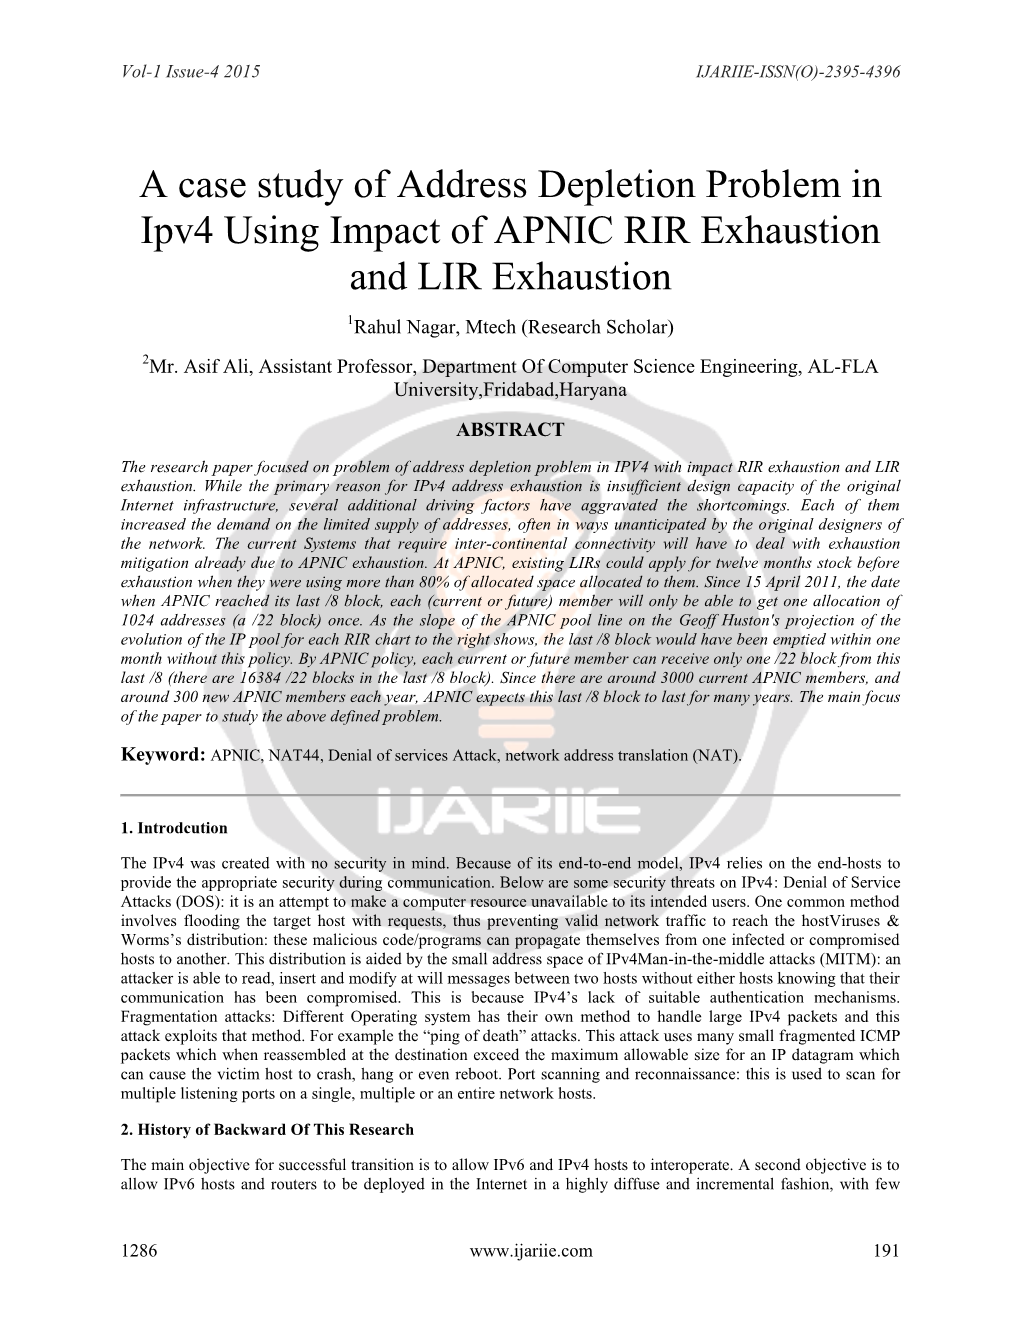 A Case Study of Address Depletion Problem in Ipv4 Using Impact of APNIC RIR Exhaustion and LIR Exhaustion 1Rahul Nagar, Mtech (Research Scholar) 2Mr